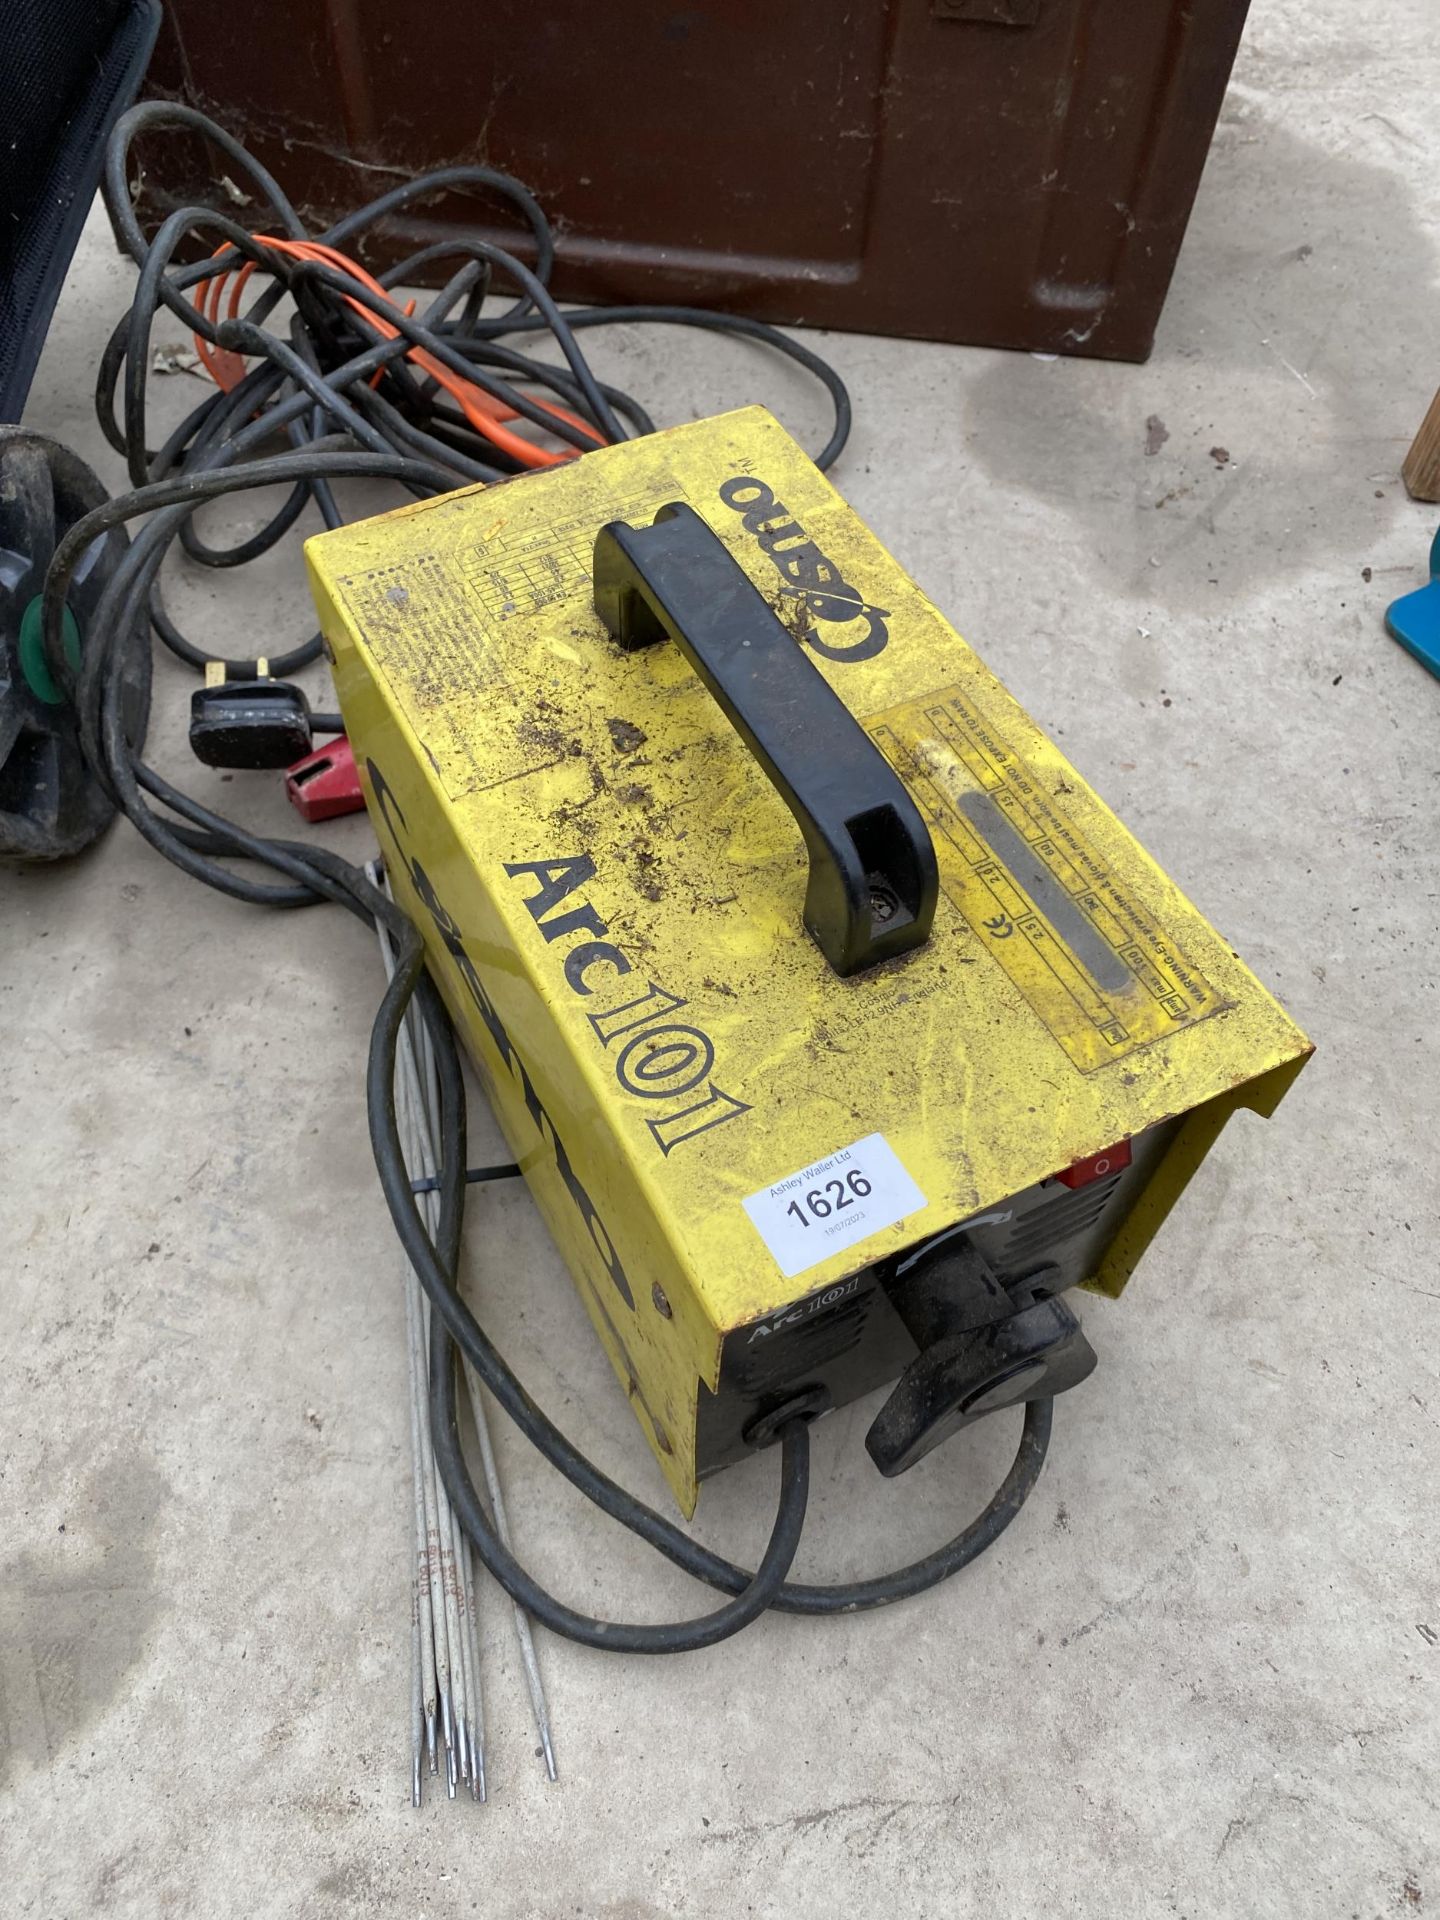 AN ELECTRIC COSMO ARC101 ARC WELDER WITH RODS